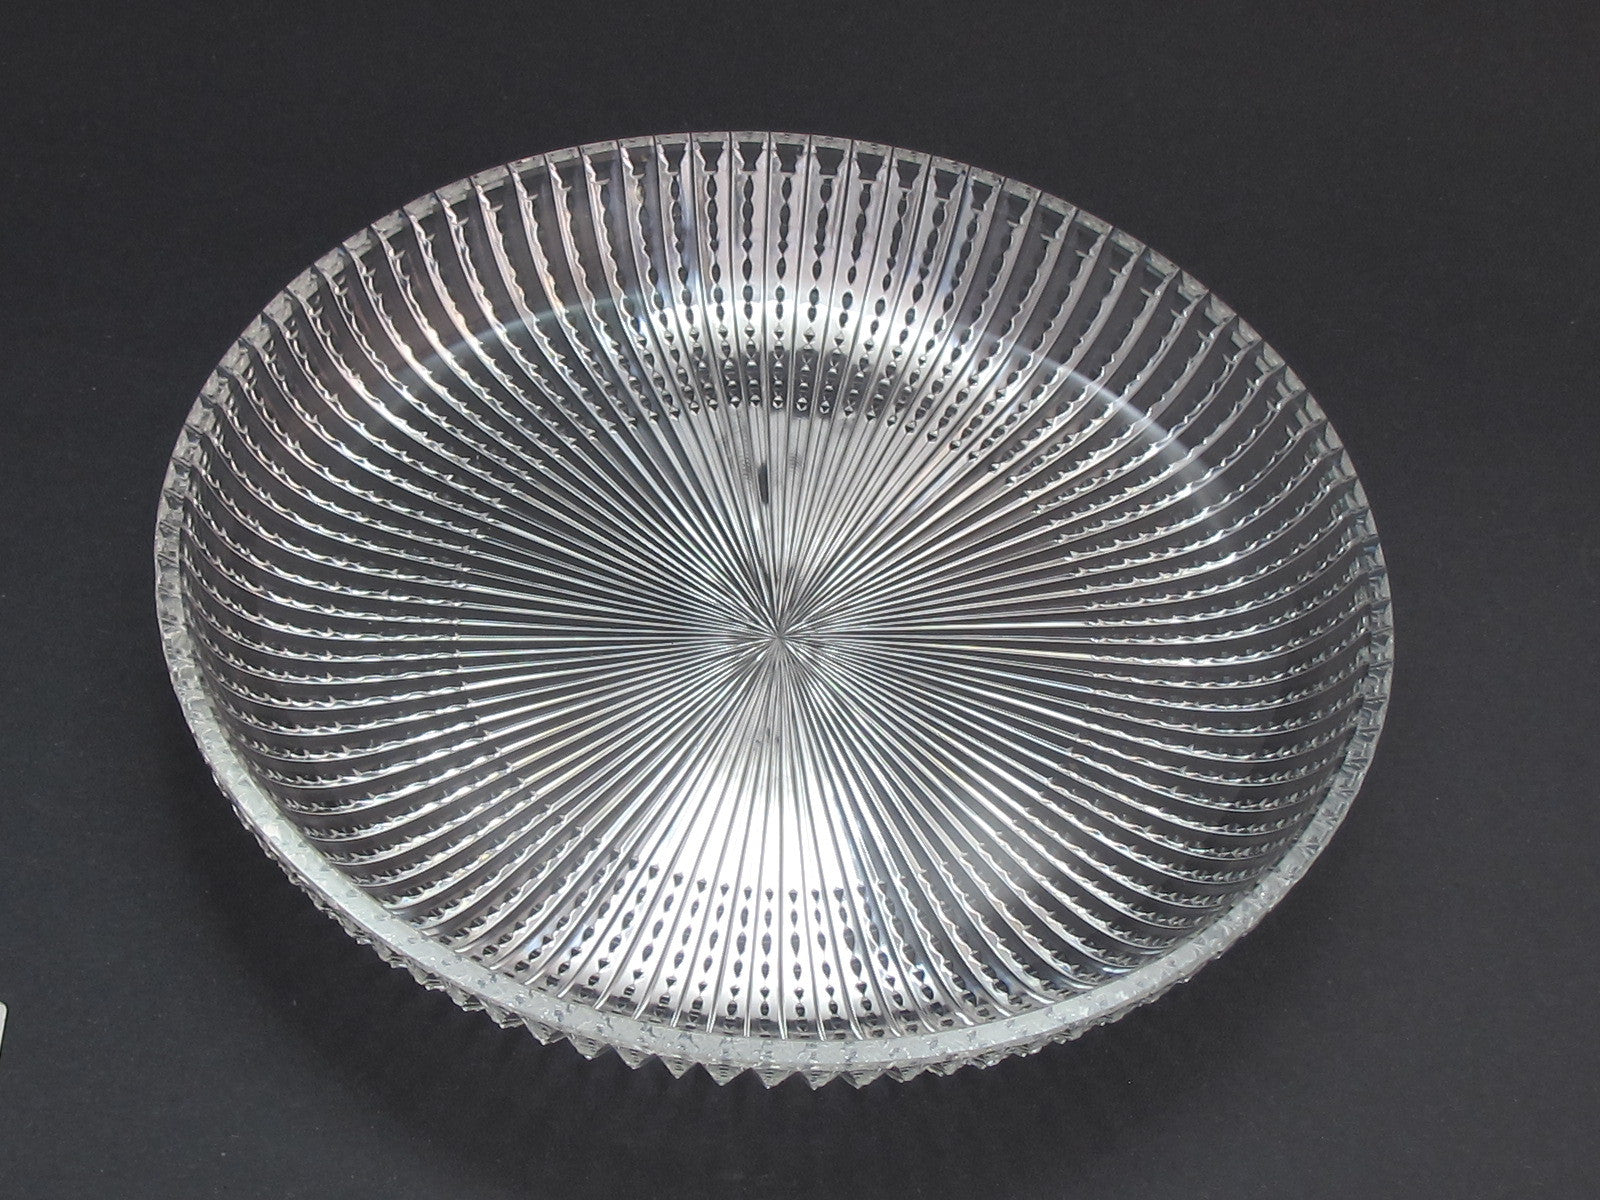 Hand Cut 24% lead crystal  large tray signed brilliant - O'Rourke crystal awards & gifts abp cut glass